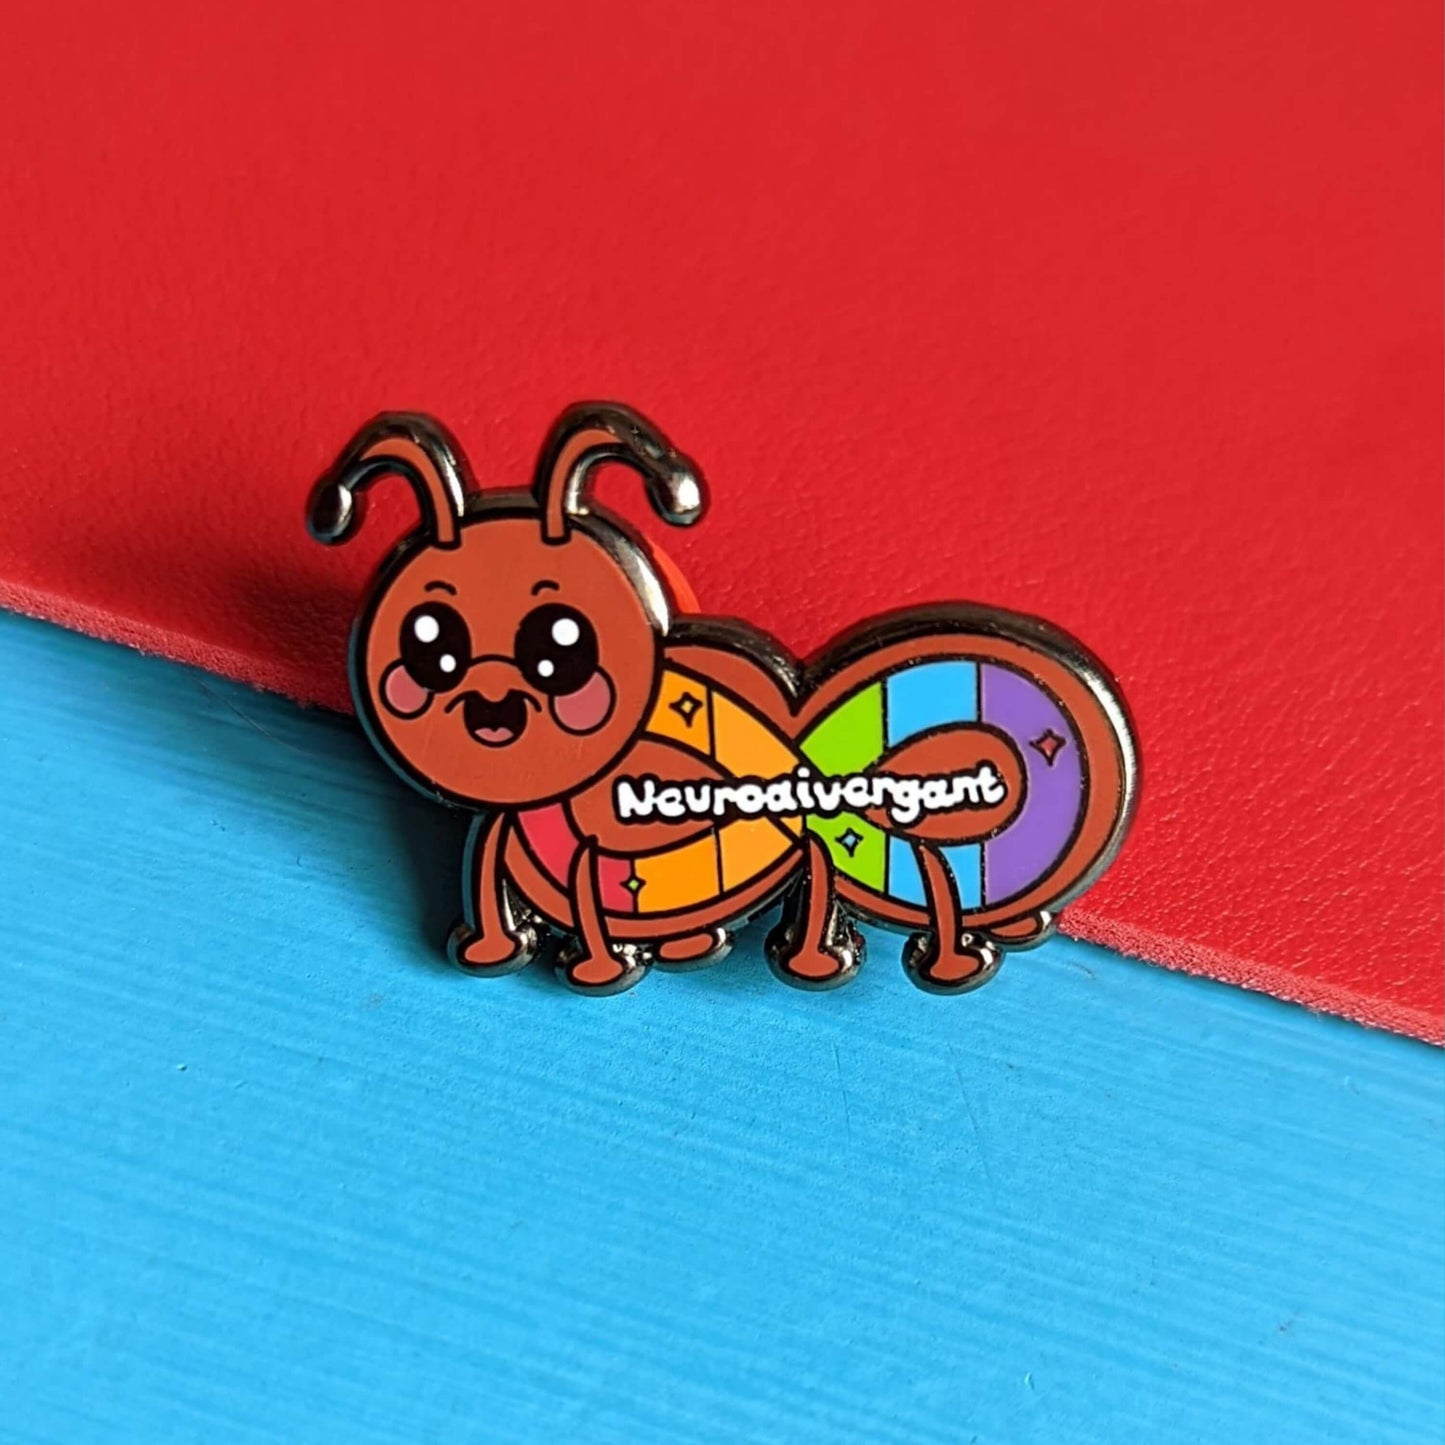 The Neurodivergant Ant Enamel Pin - Neurodivergent on a red and blue background. The brown ant shape enamel pin is smiling with a rainbow infinity symbol and white text reading 'neurodivergant' with sparkles across its body. The hand drawn design is raising awareness for neurodiversity.